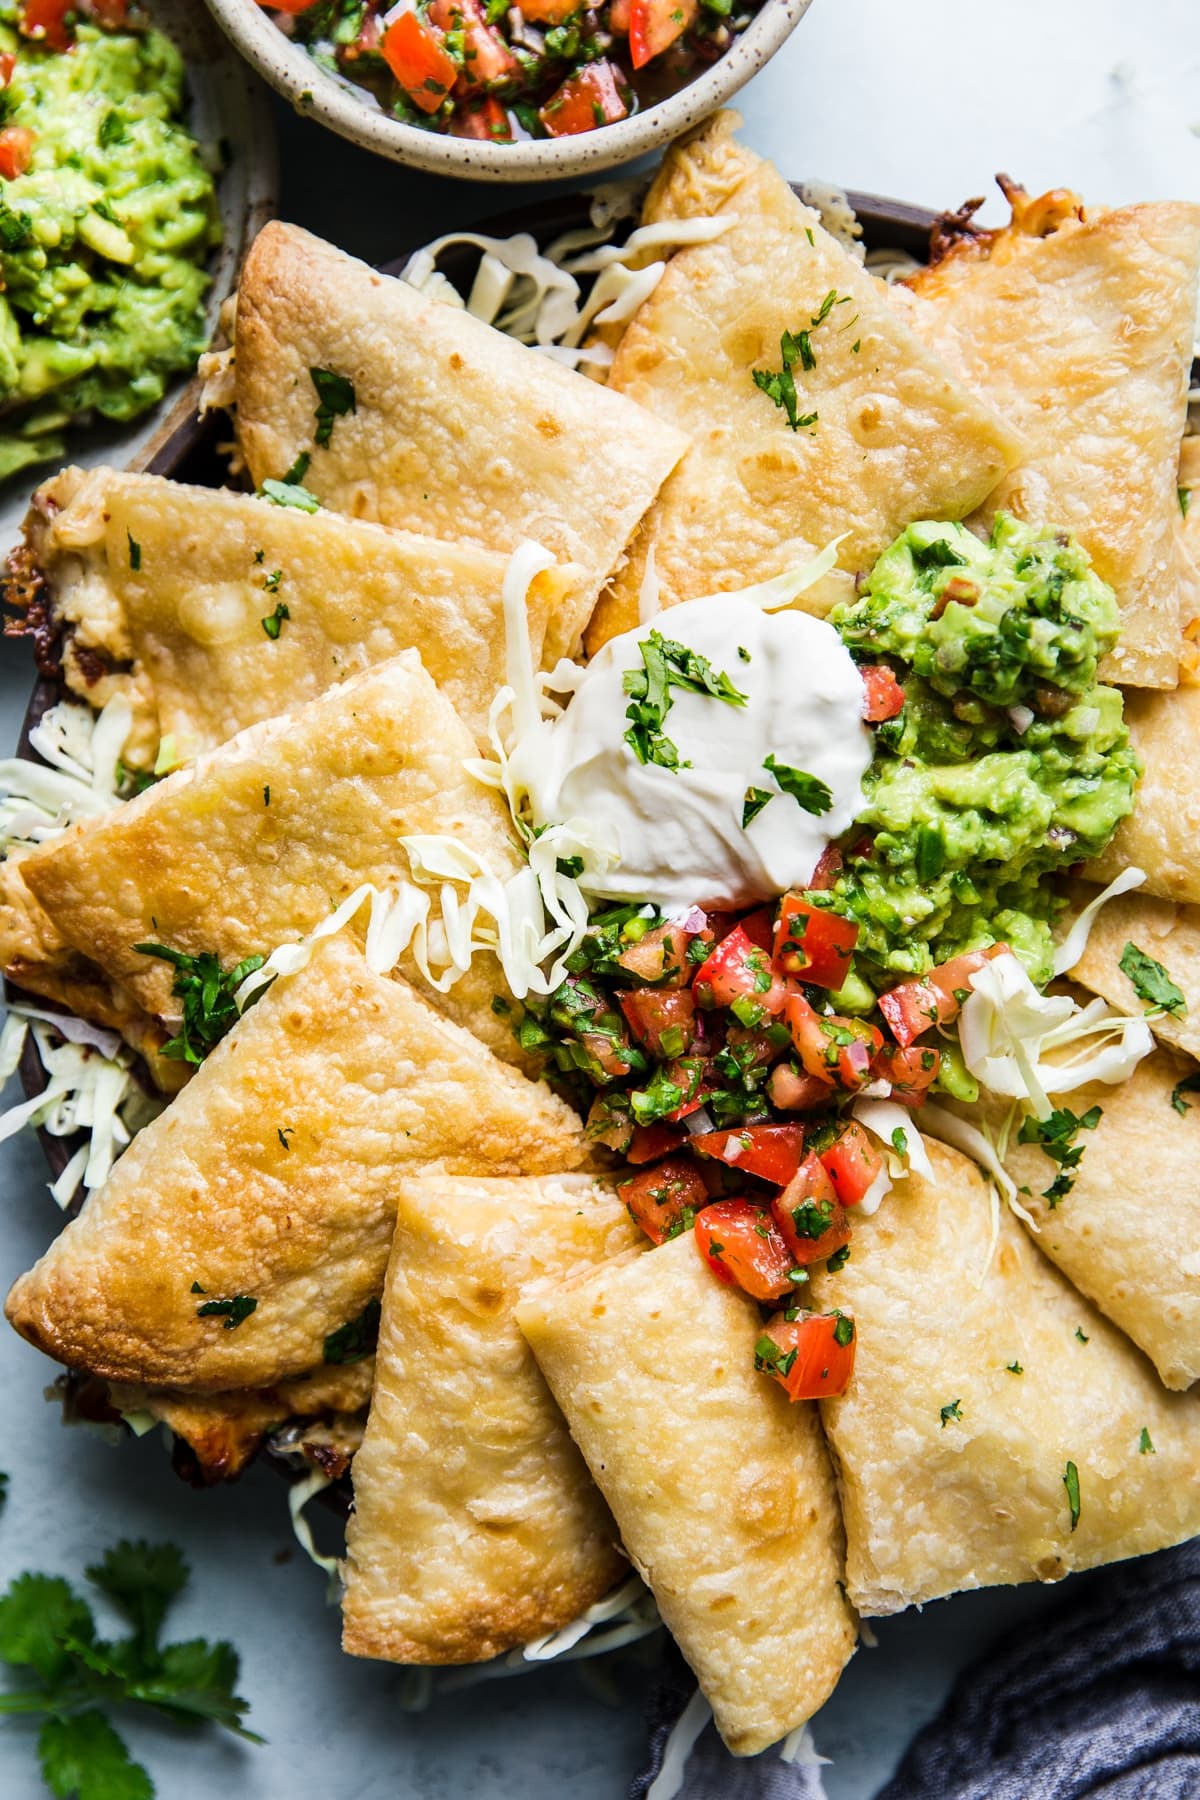 baked chicken quesadillas cut up and served with guacamole, fresh pico de gallo and sour cream